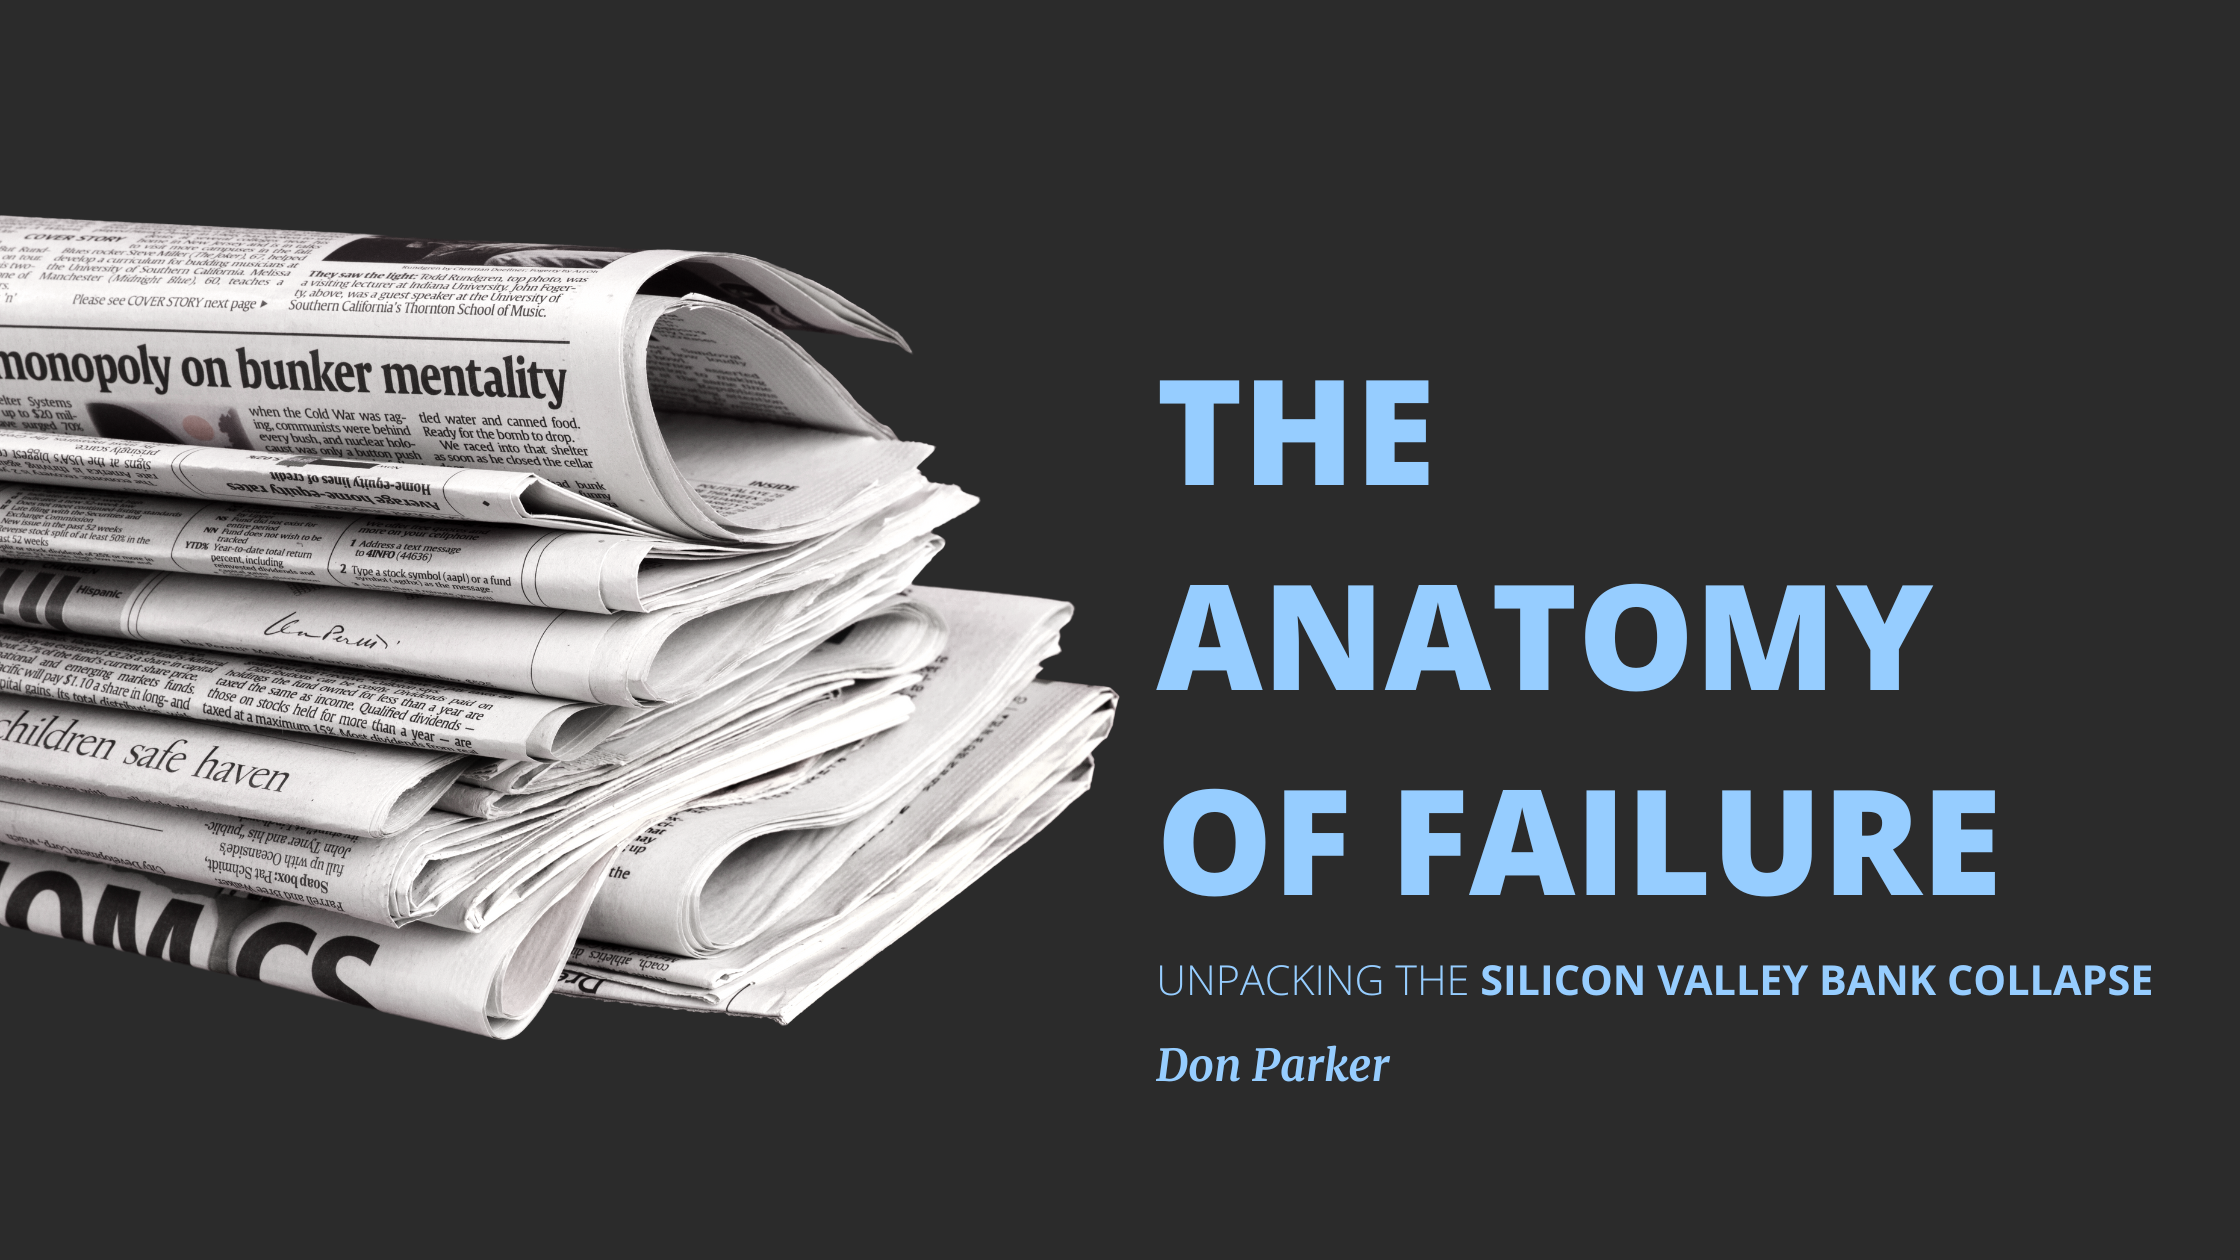 Anatomy of Failure: Unpacking the Silicon Valley Bank Collapse